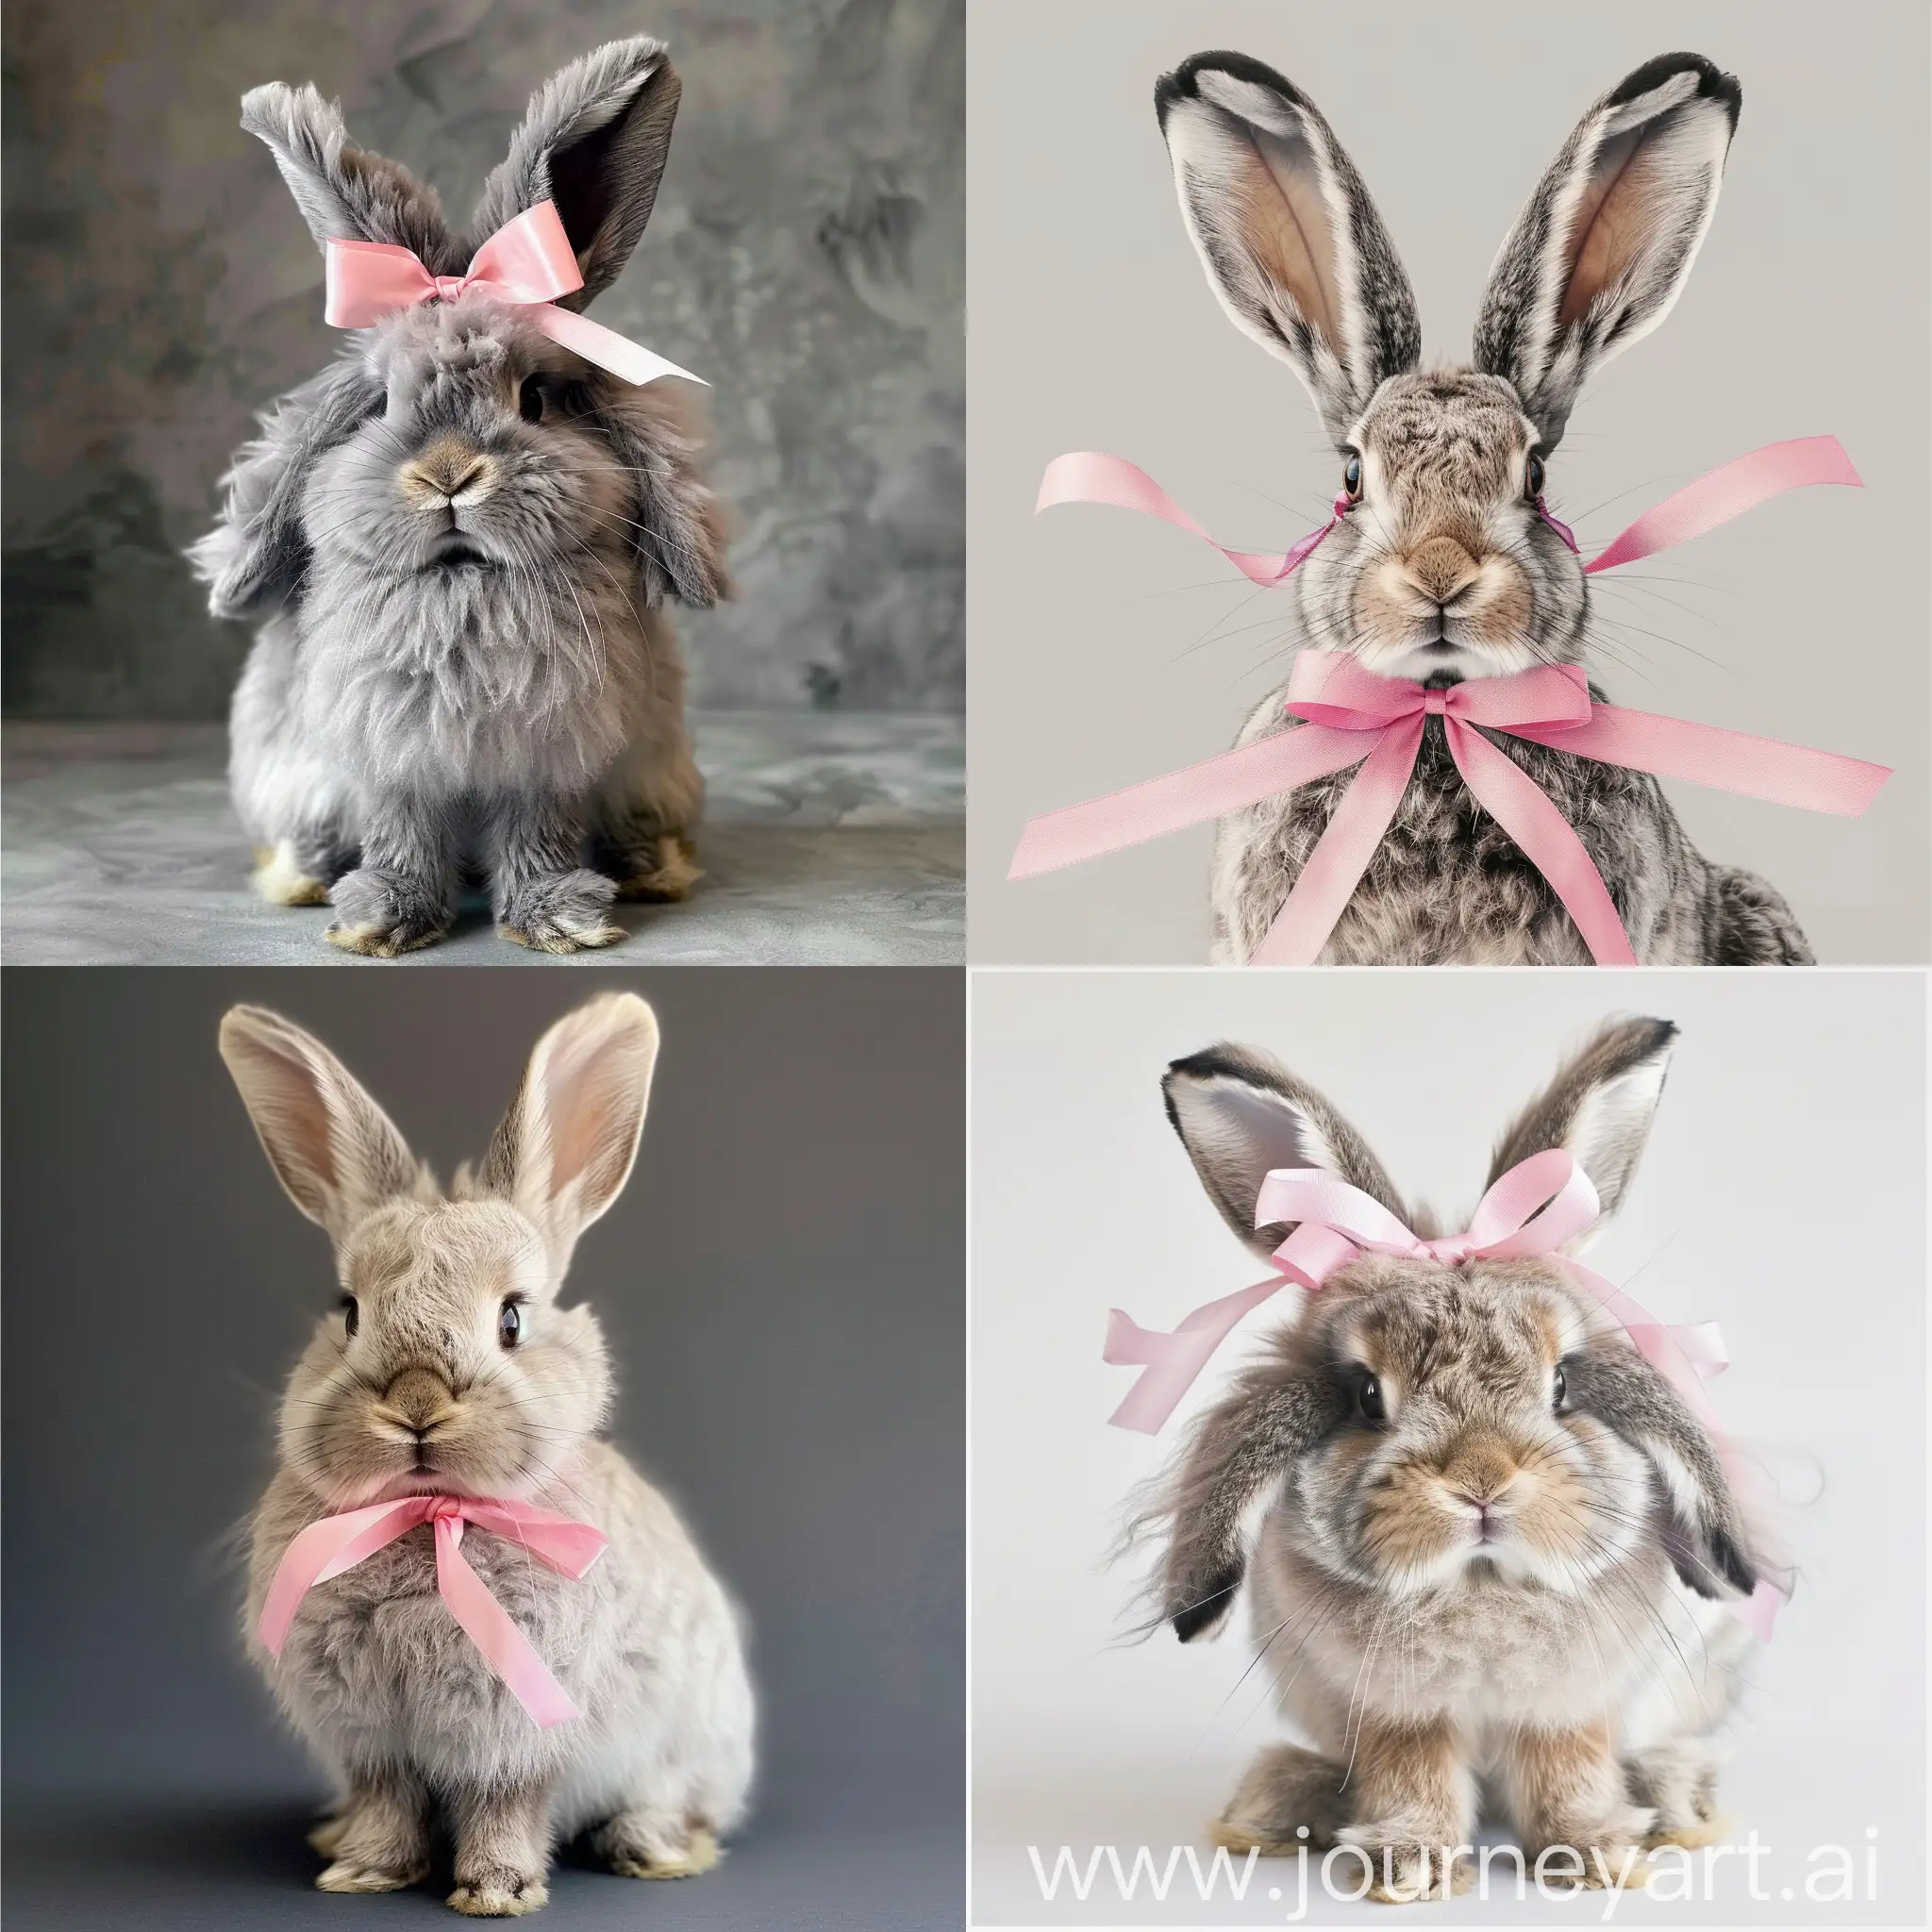 Adorable-Fluffy-Hare-with-Pink-Ribbon-Cute-Animal-Portrait